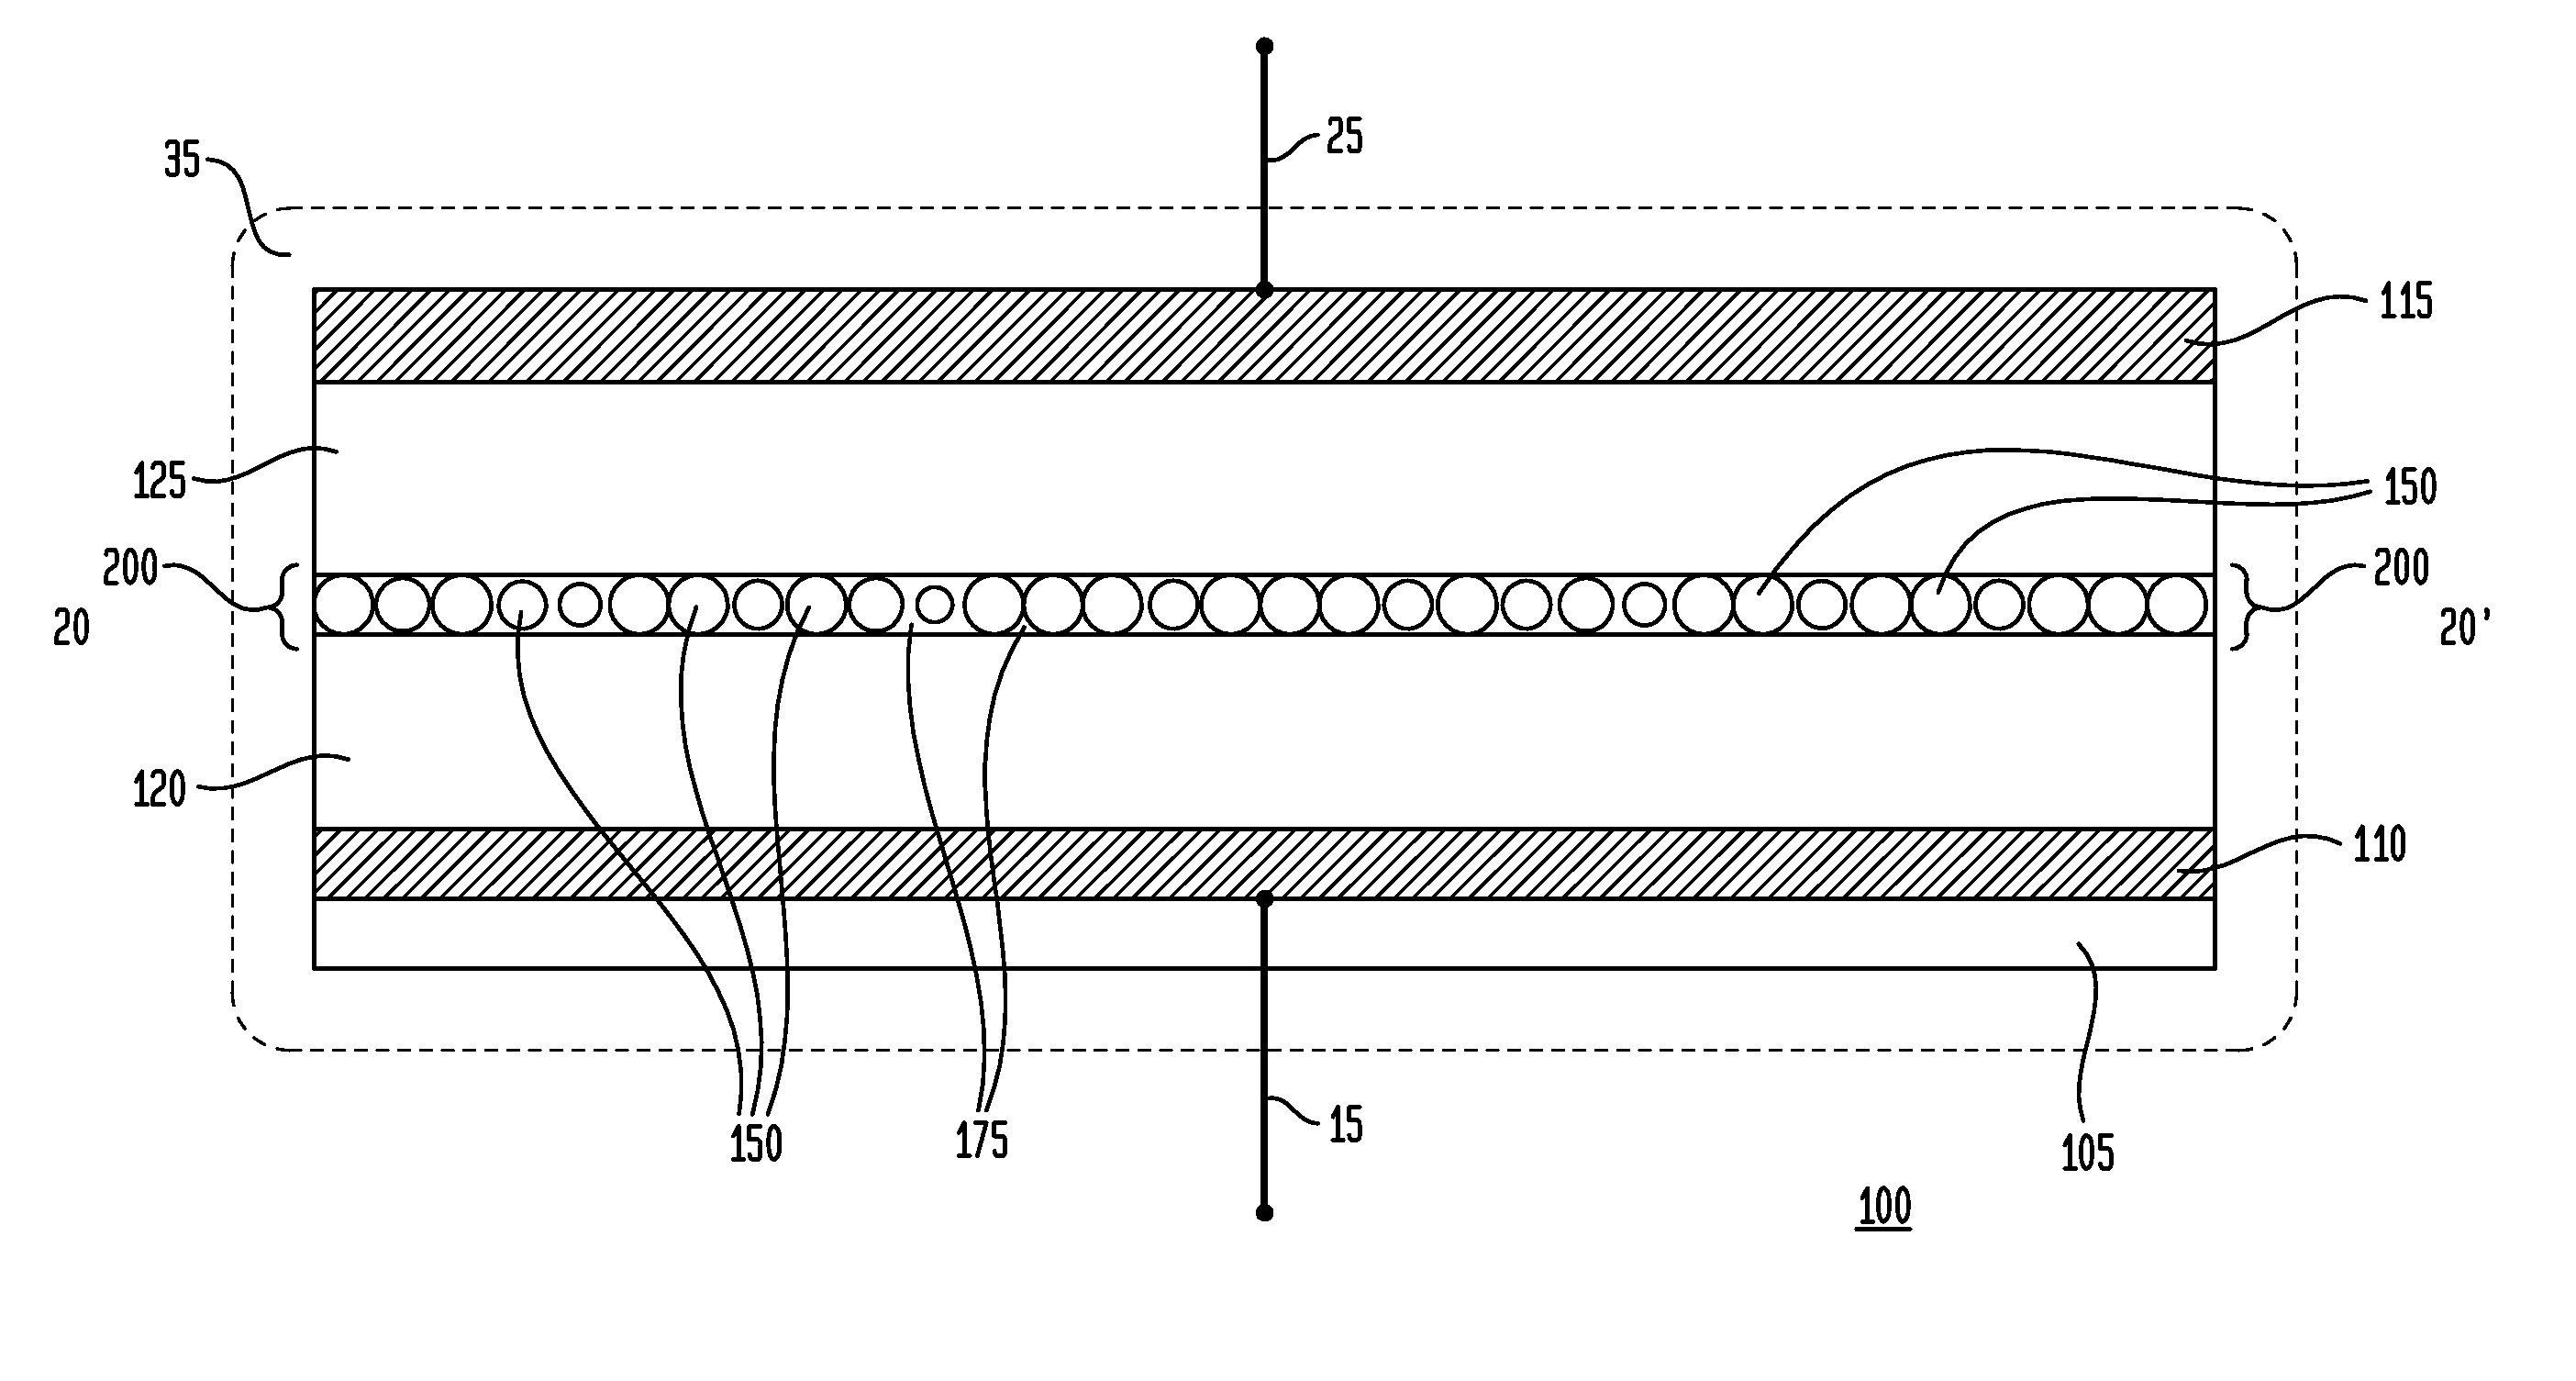 Printable Composition for an Ionic Gel Separation Layer For Energy Storage Devices